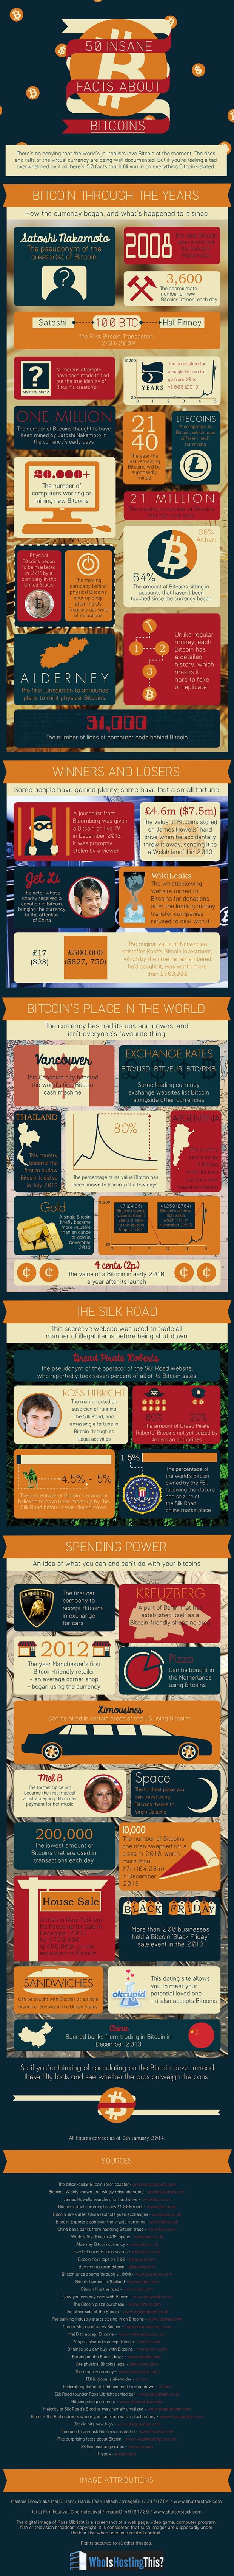 50-facts-about-bitcoin-infographic